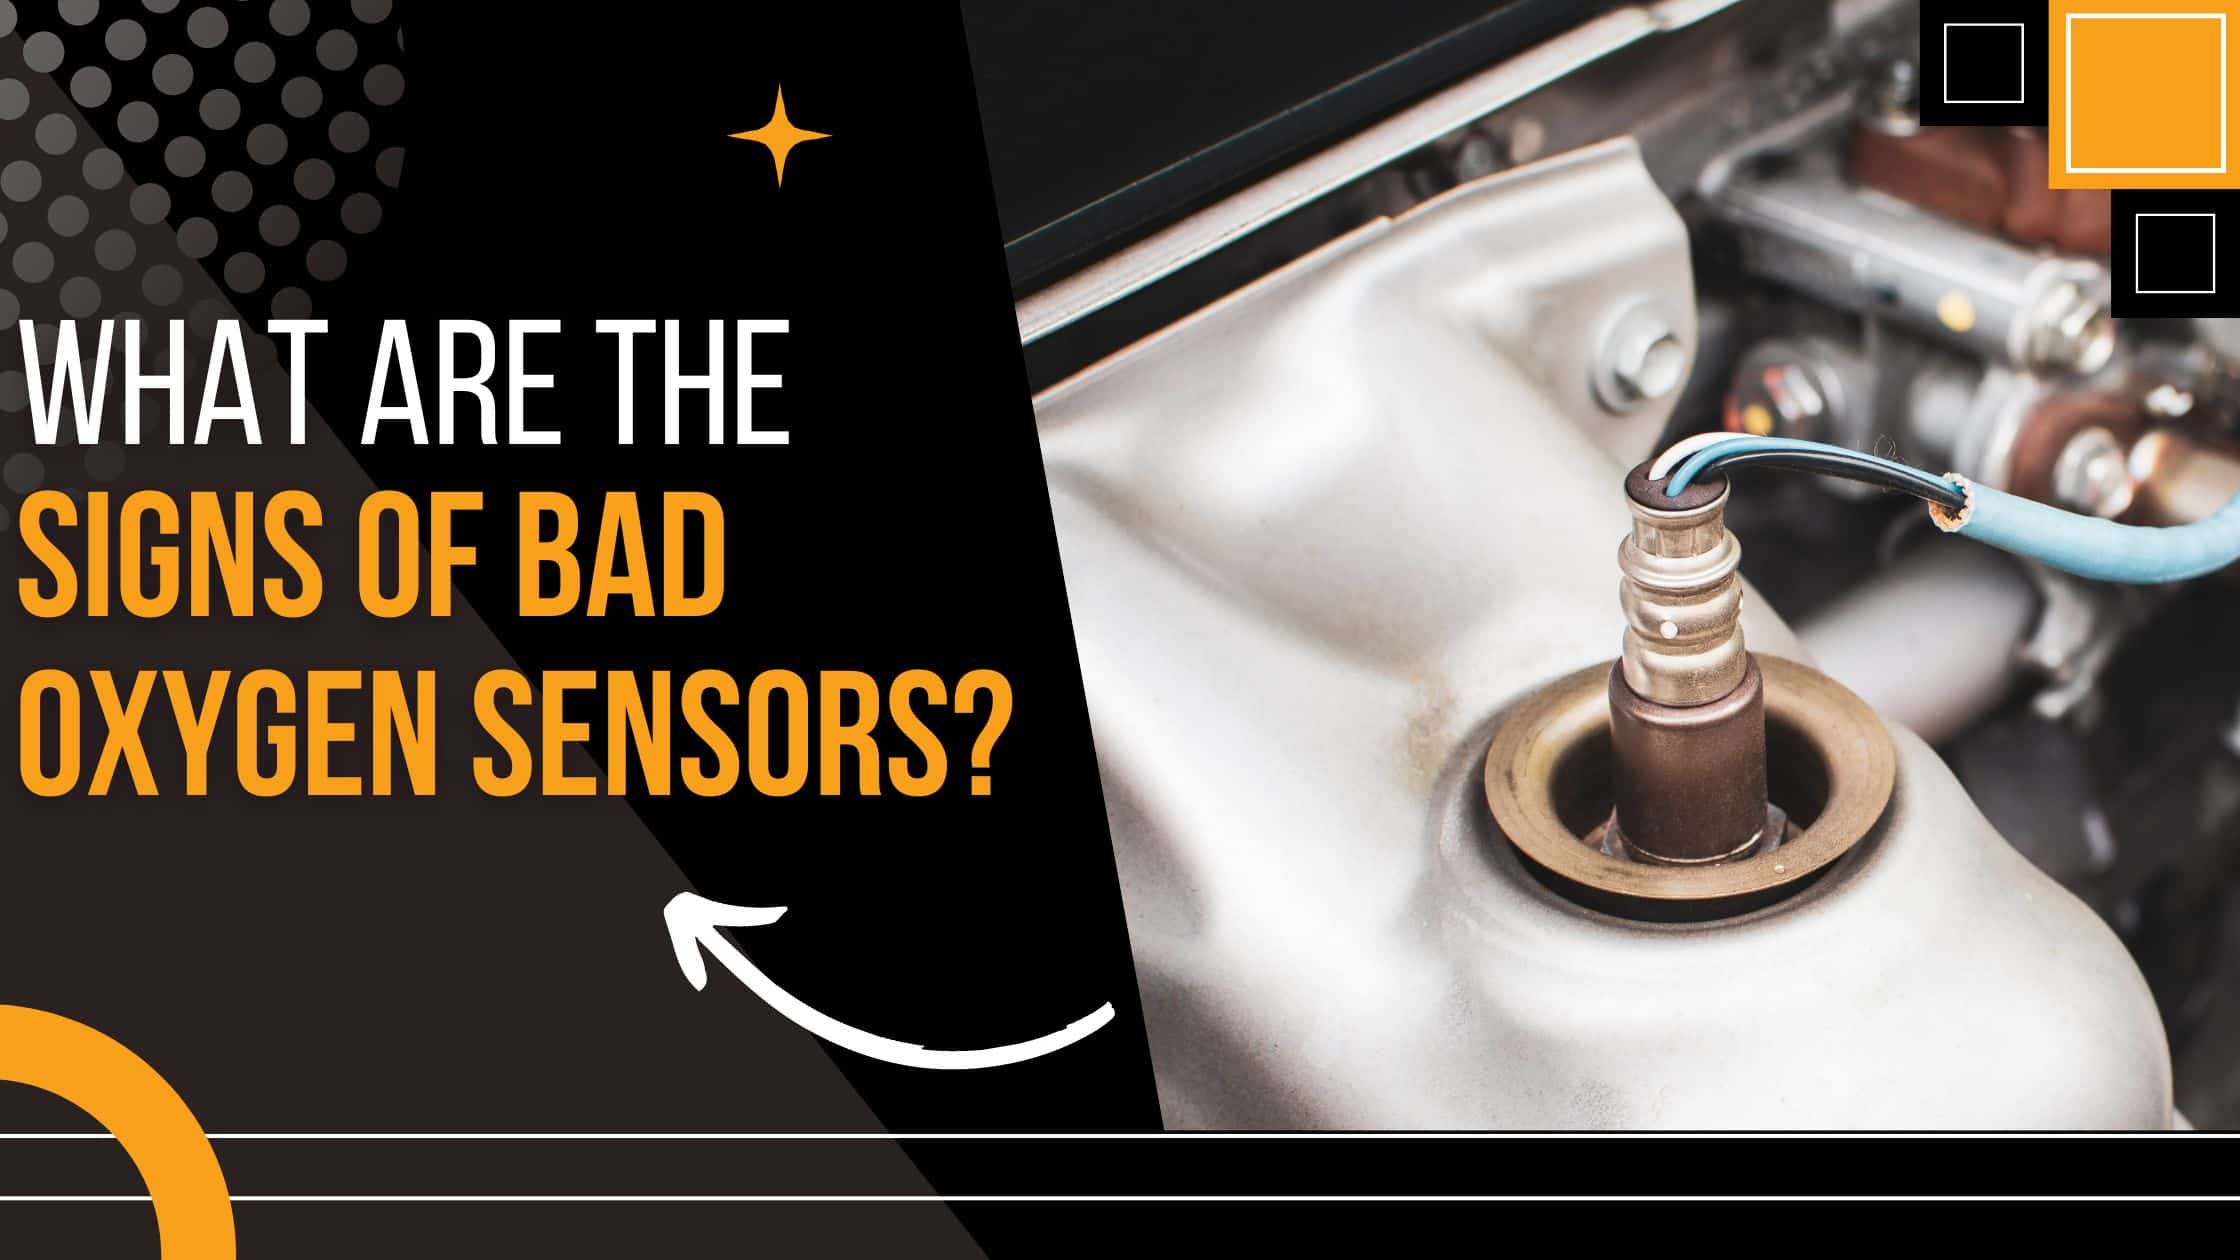 What Are The Signs Of Bad Oxygen Sensors?